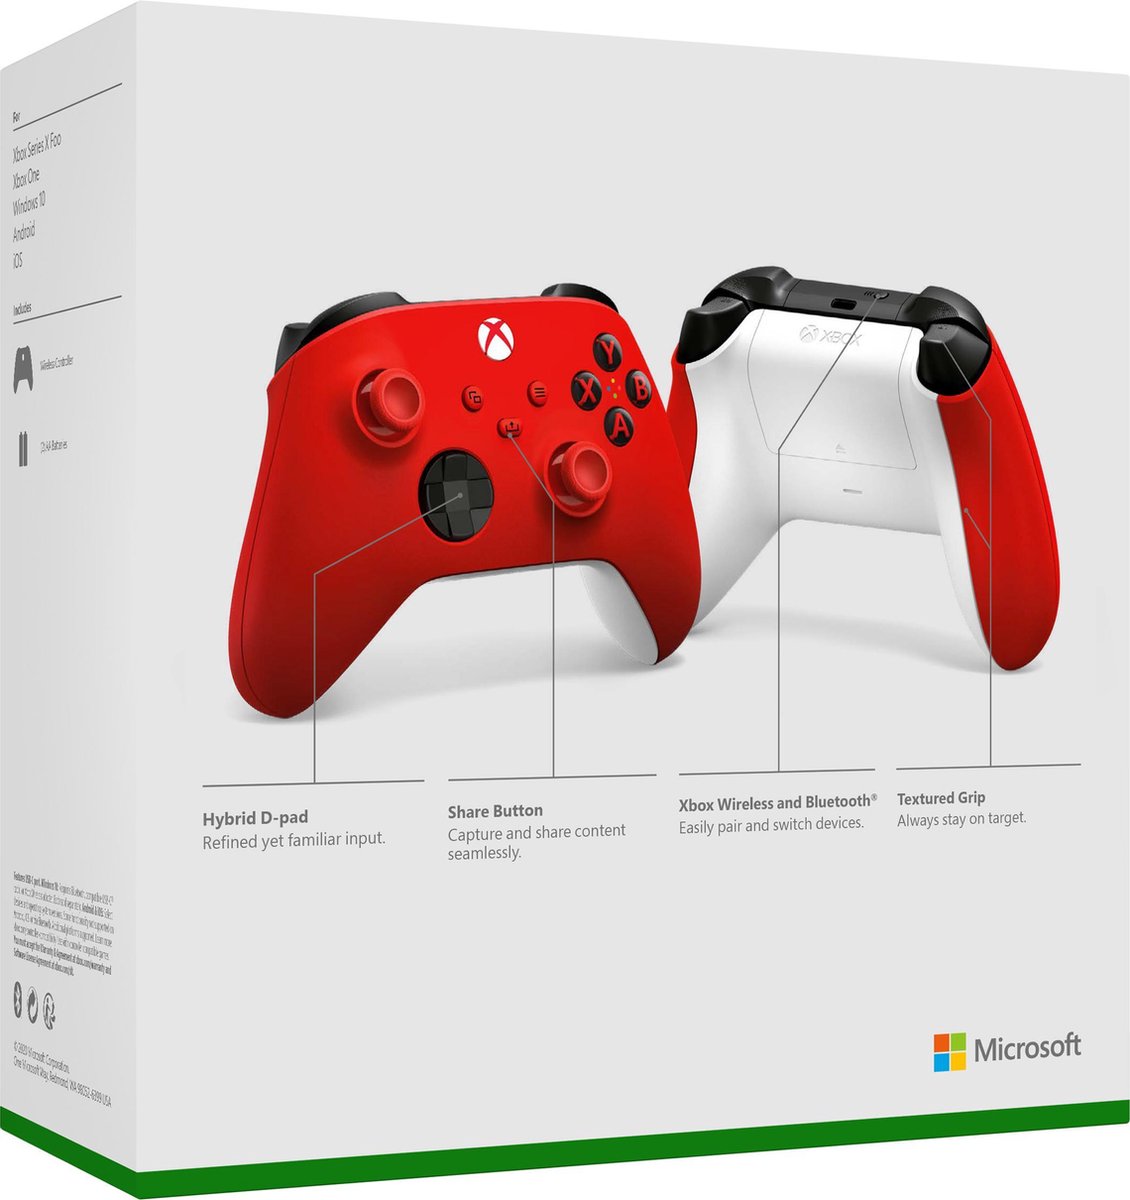 Xbox wireless controller voor Xbox Series X | S en Xbox One - Pulse Red Gamesellers.nl